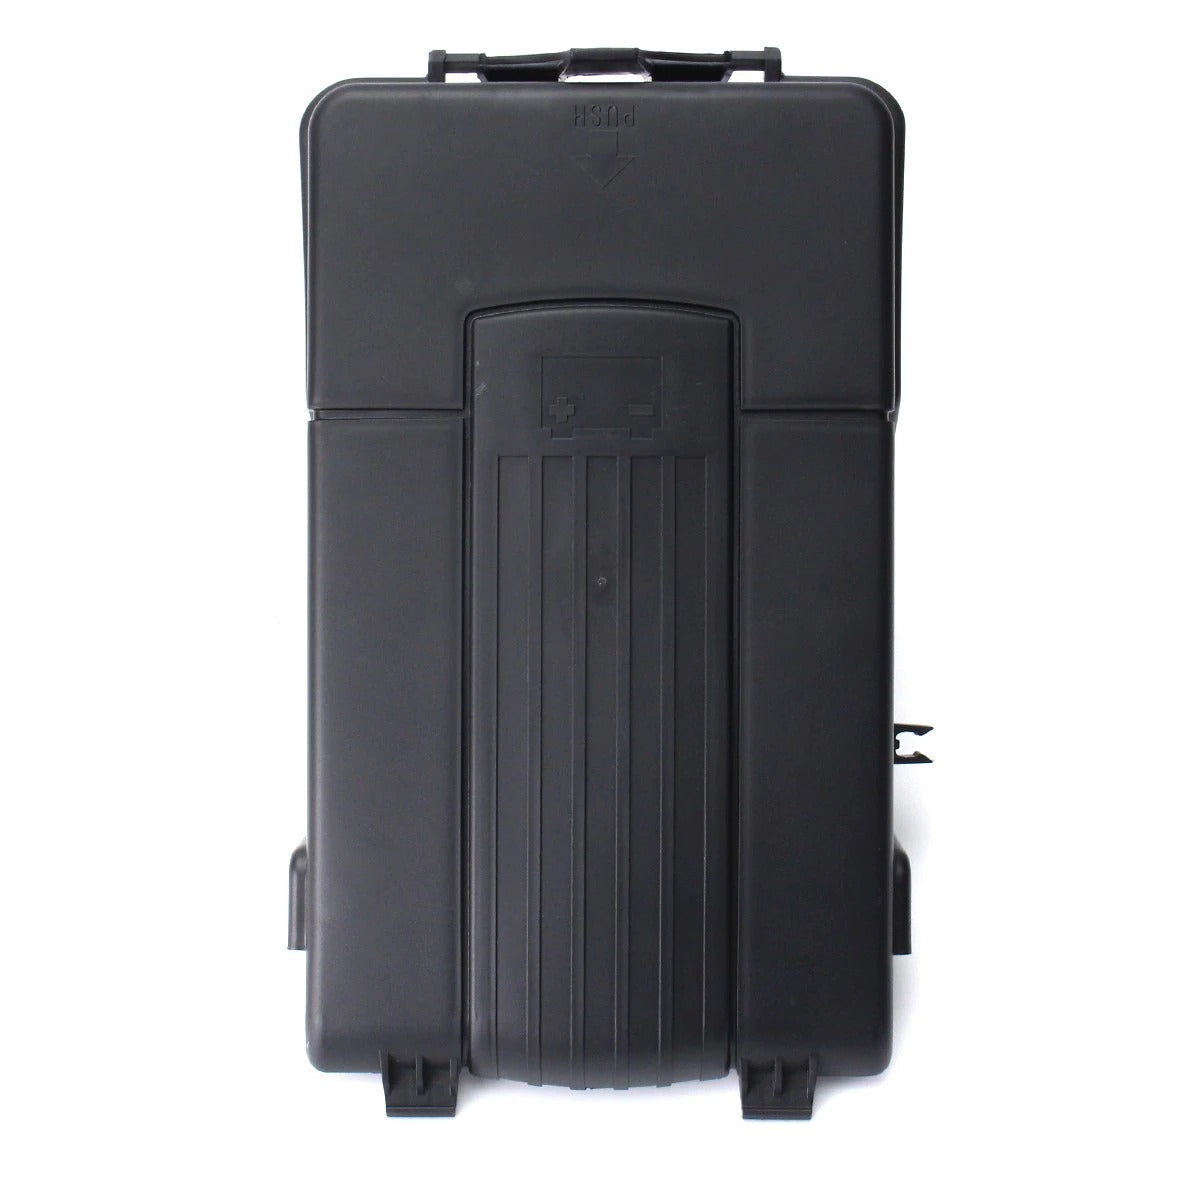 Battery Cover Top Lid Tray Fits suitable for VW Golf MK5 6 Jetta MK6 Passat B6 Tiguan Scirocco